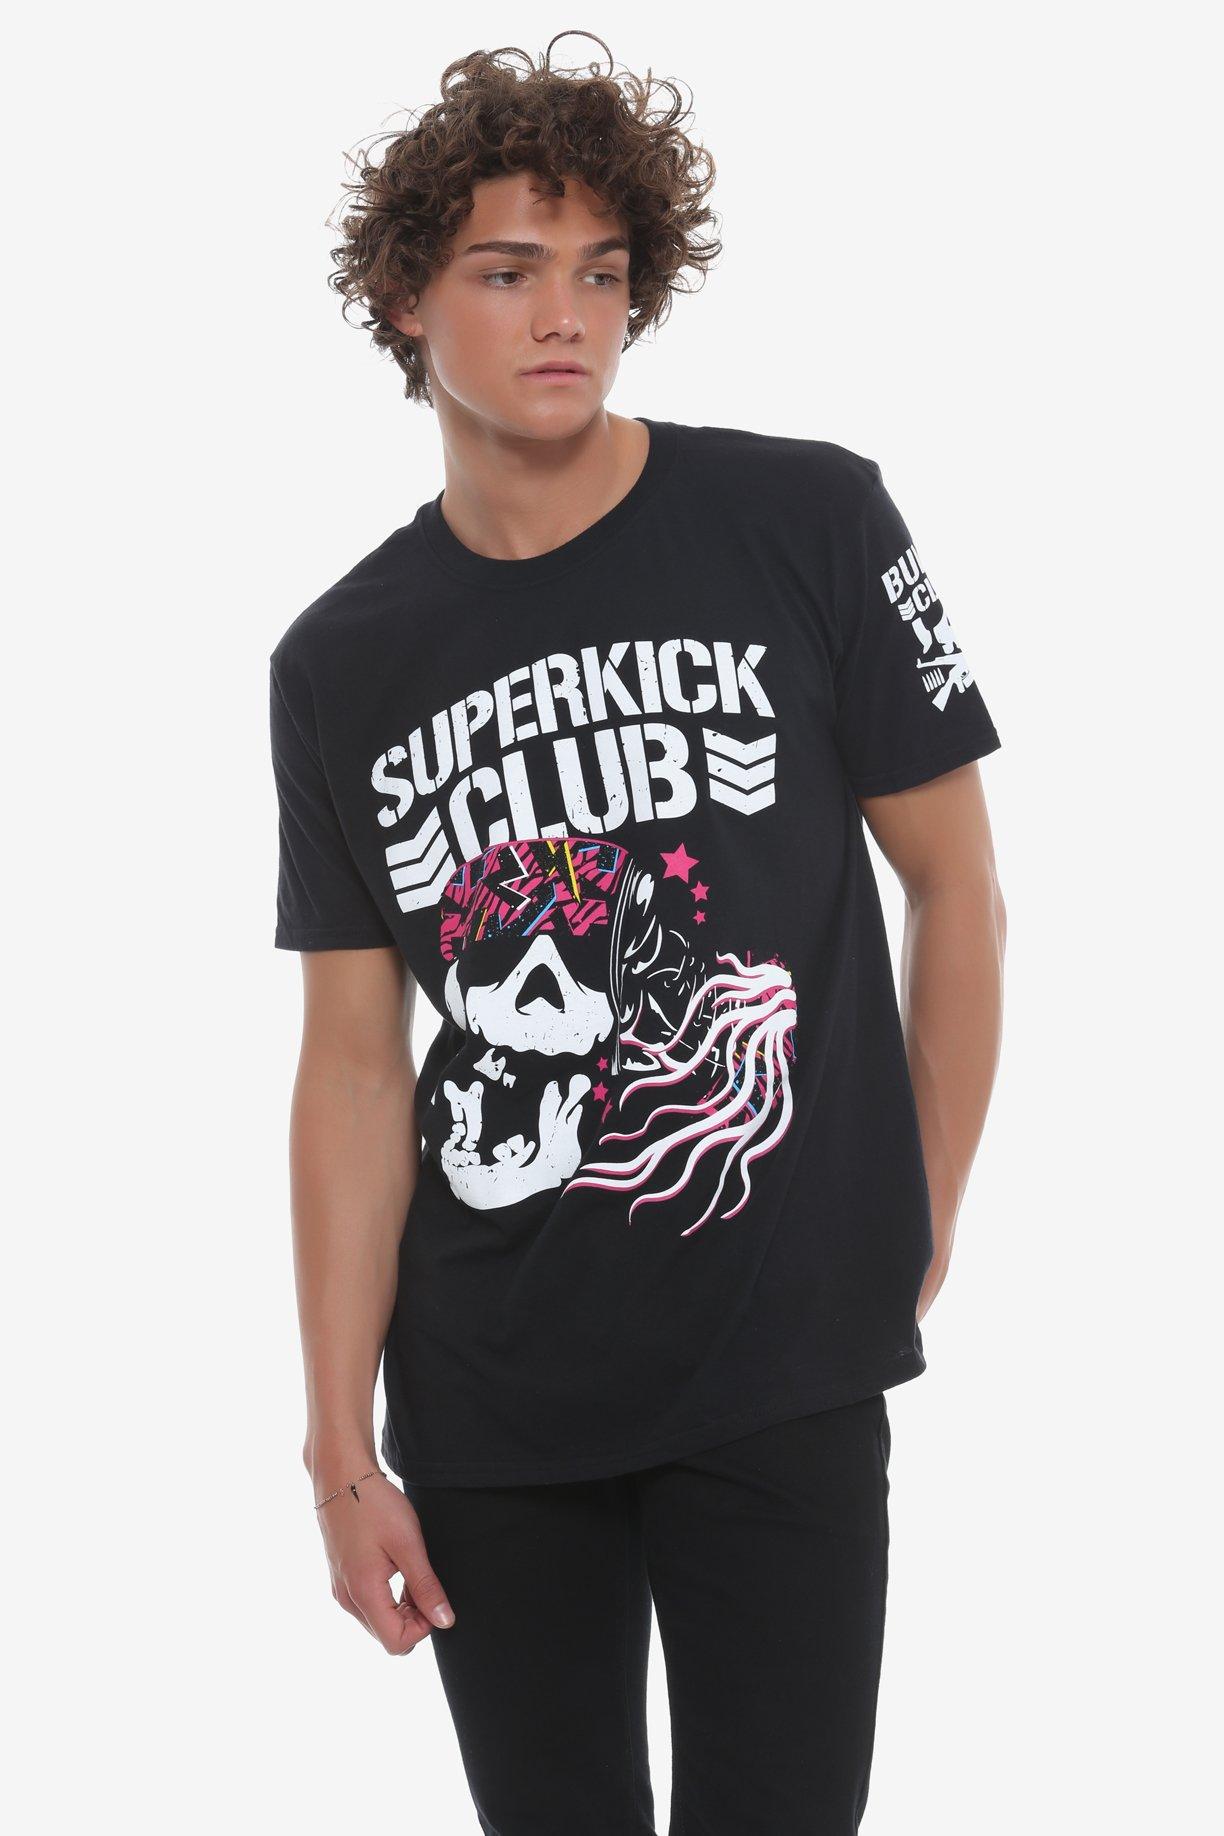 New Japan Pro-Wrestling The Young Bucks Superkick Club T-Shirt Hot Topic Exclusive, BLACK, alternate